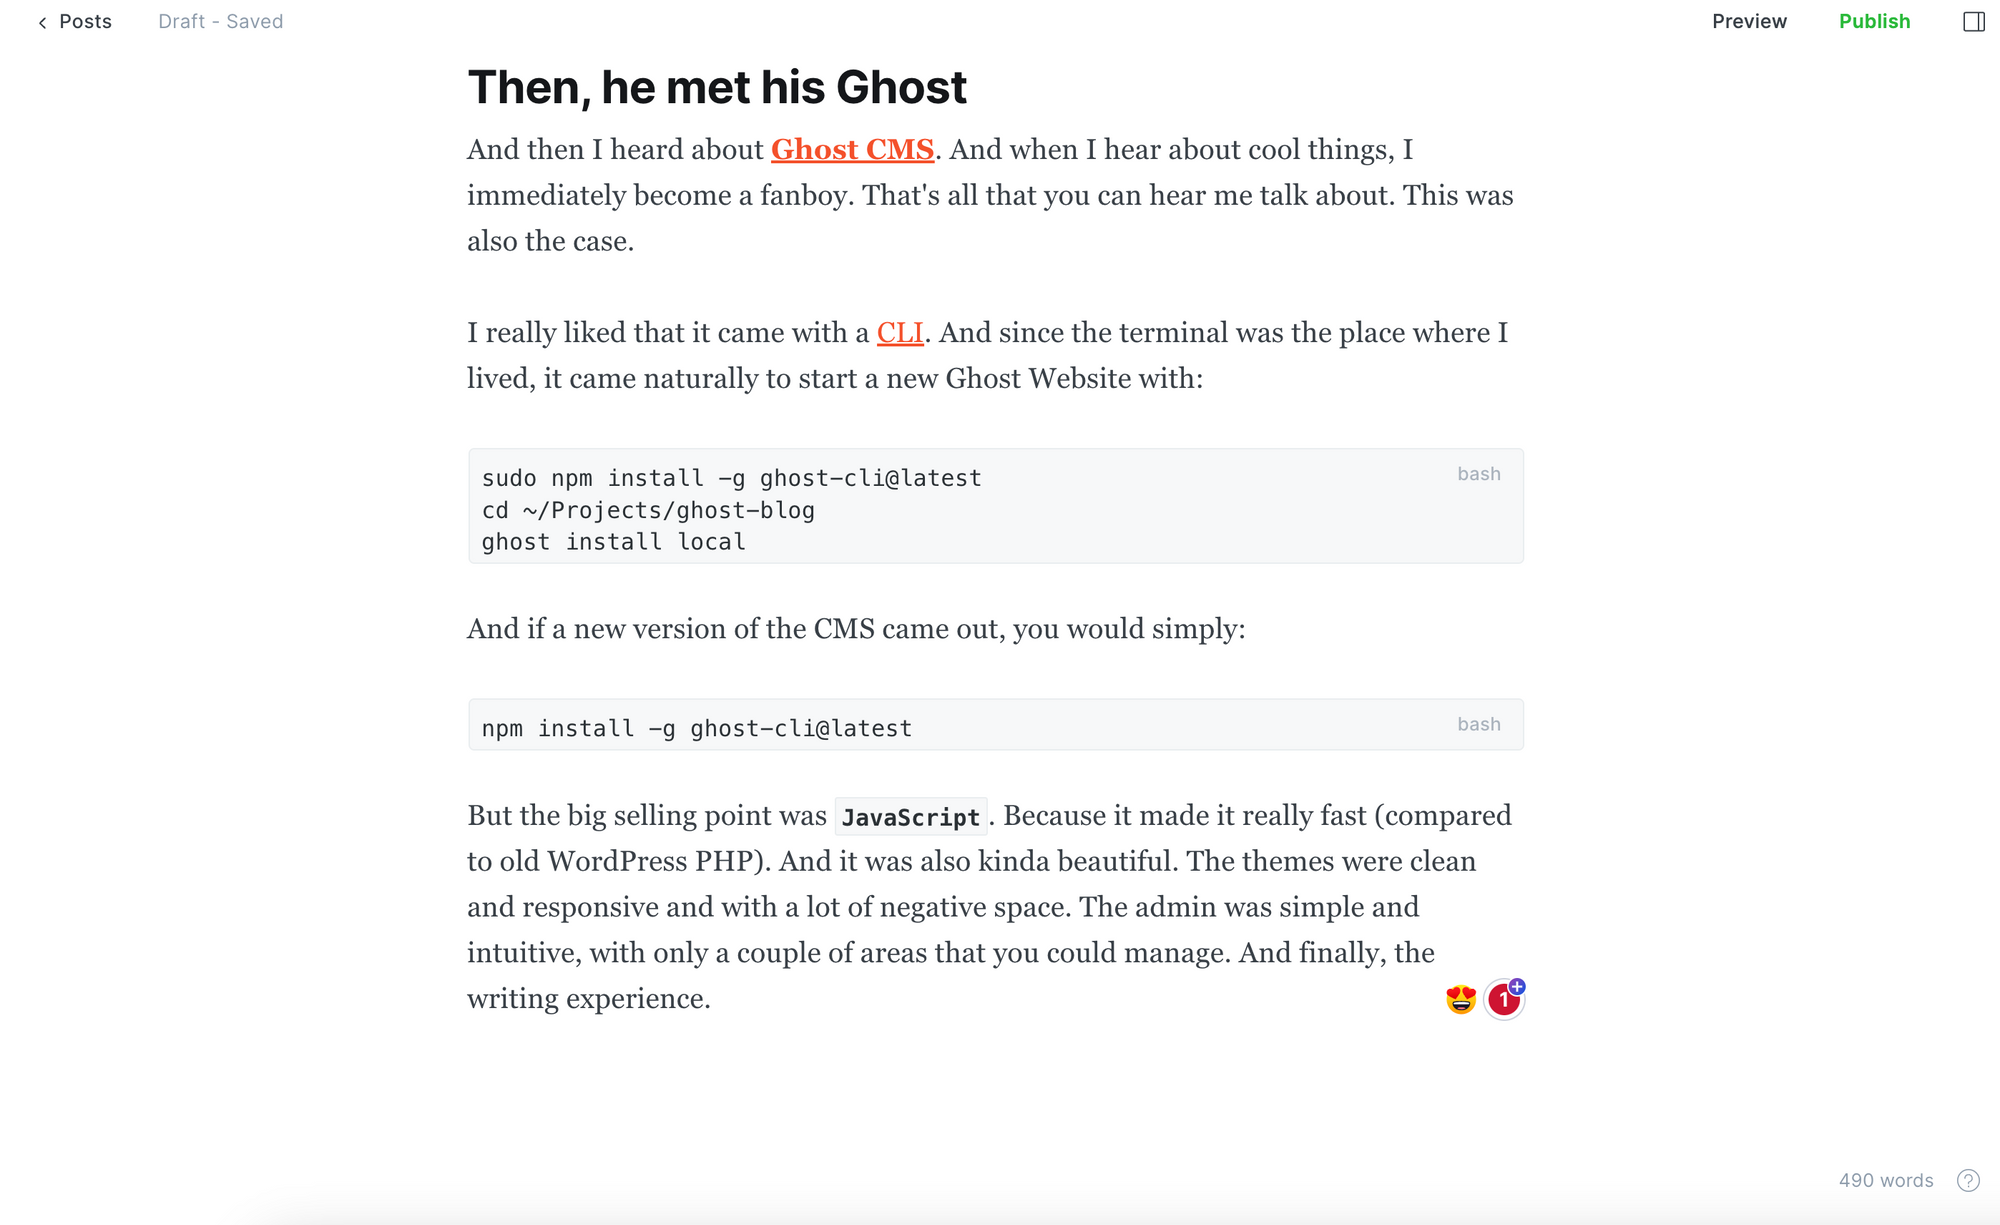 Ghost: the story of my blog